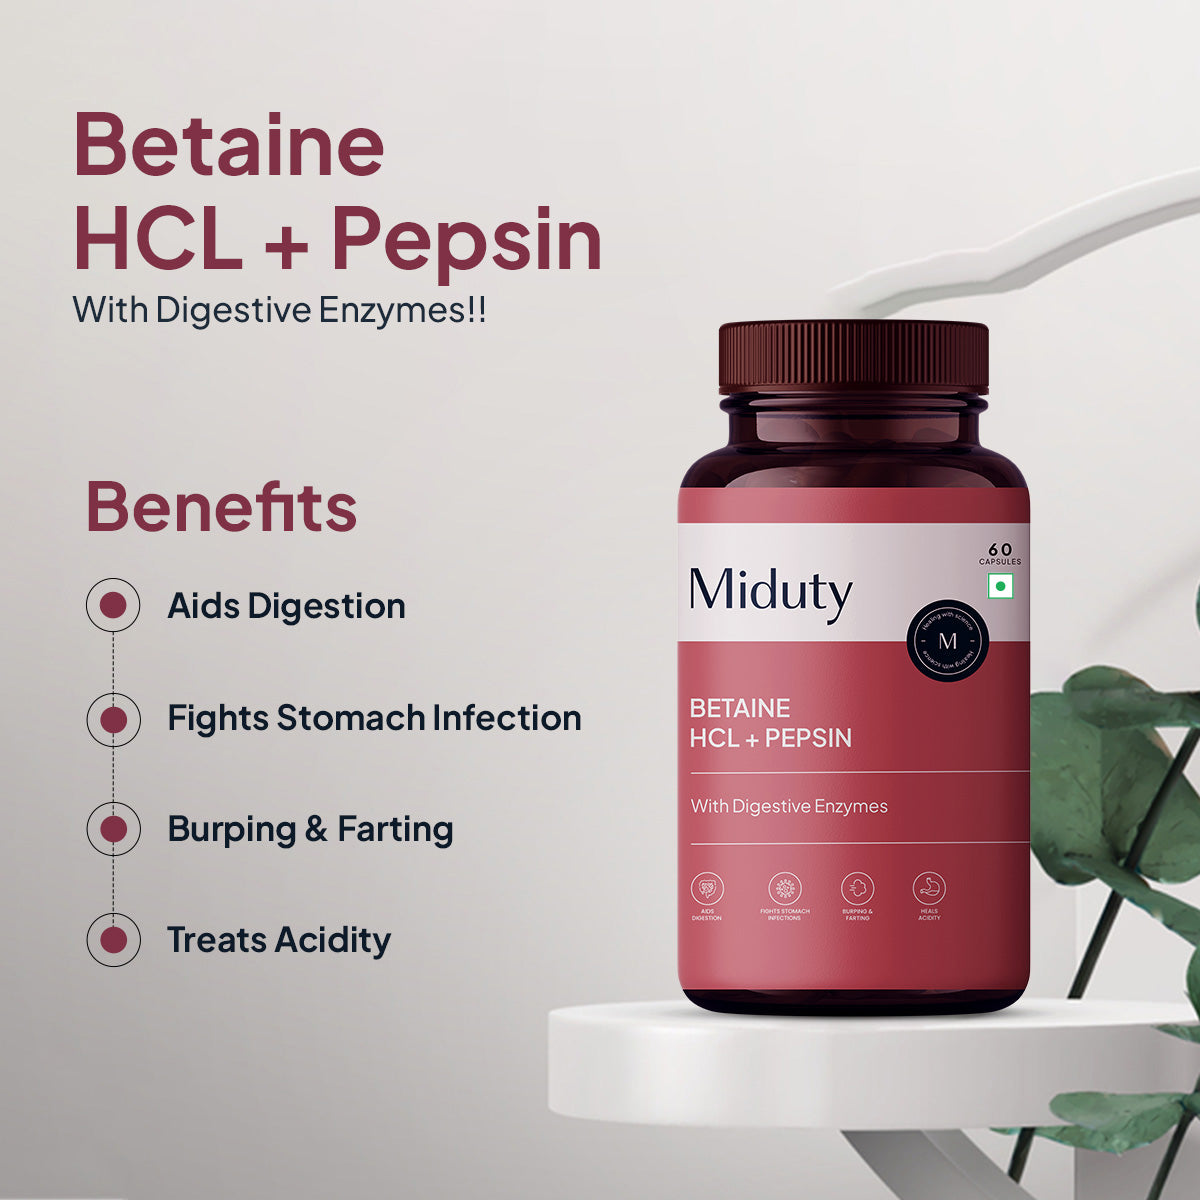 Betaine HCL+ Pepsin